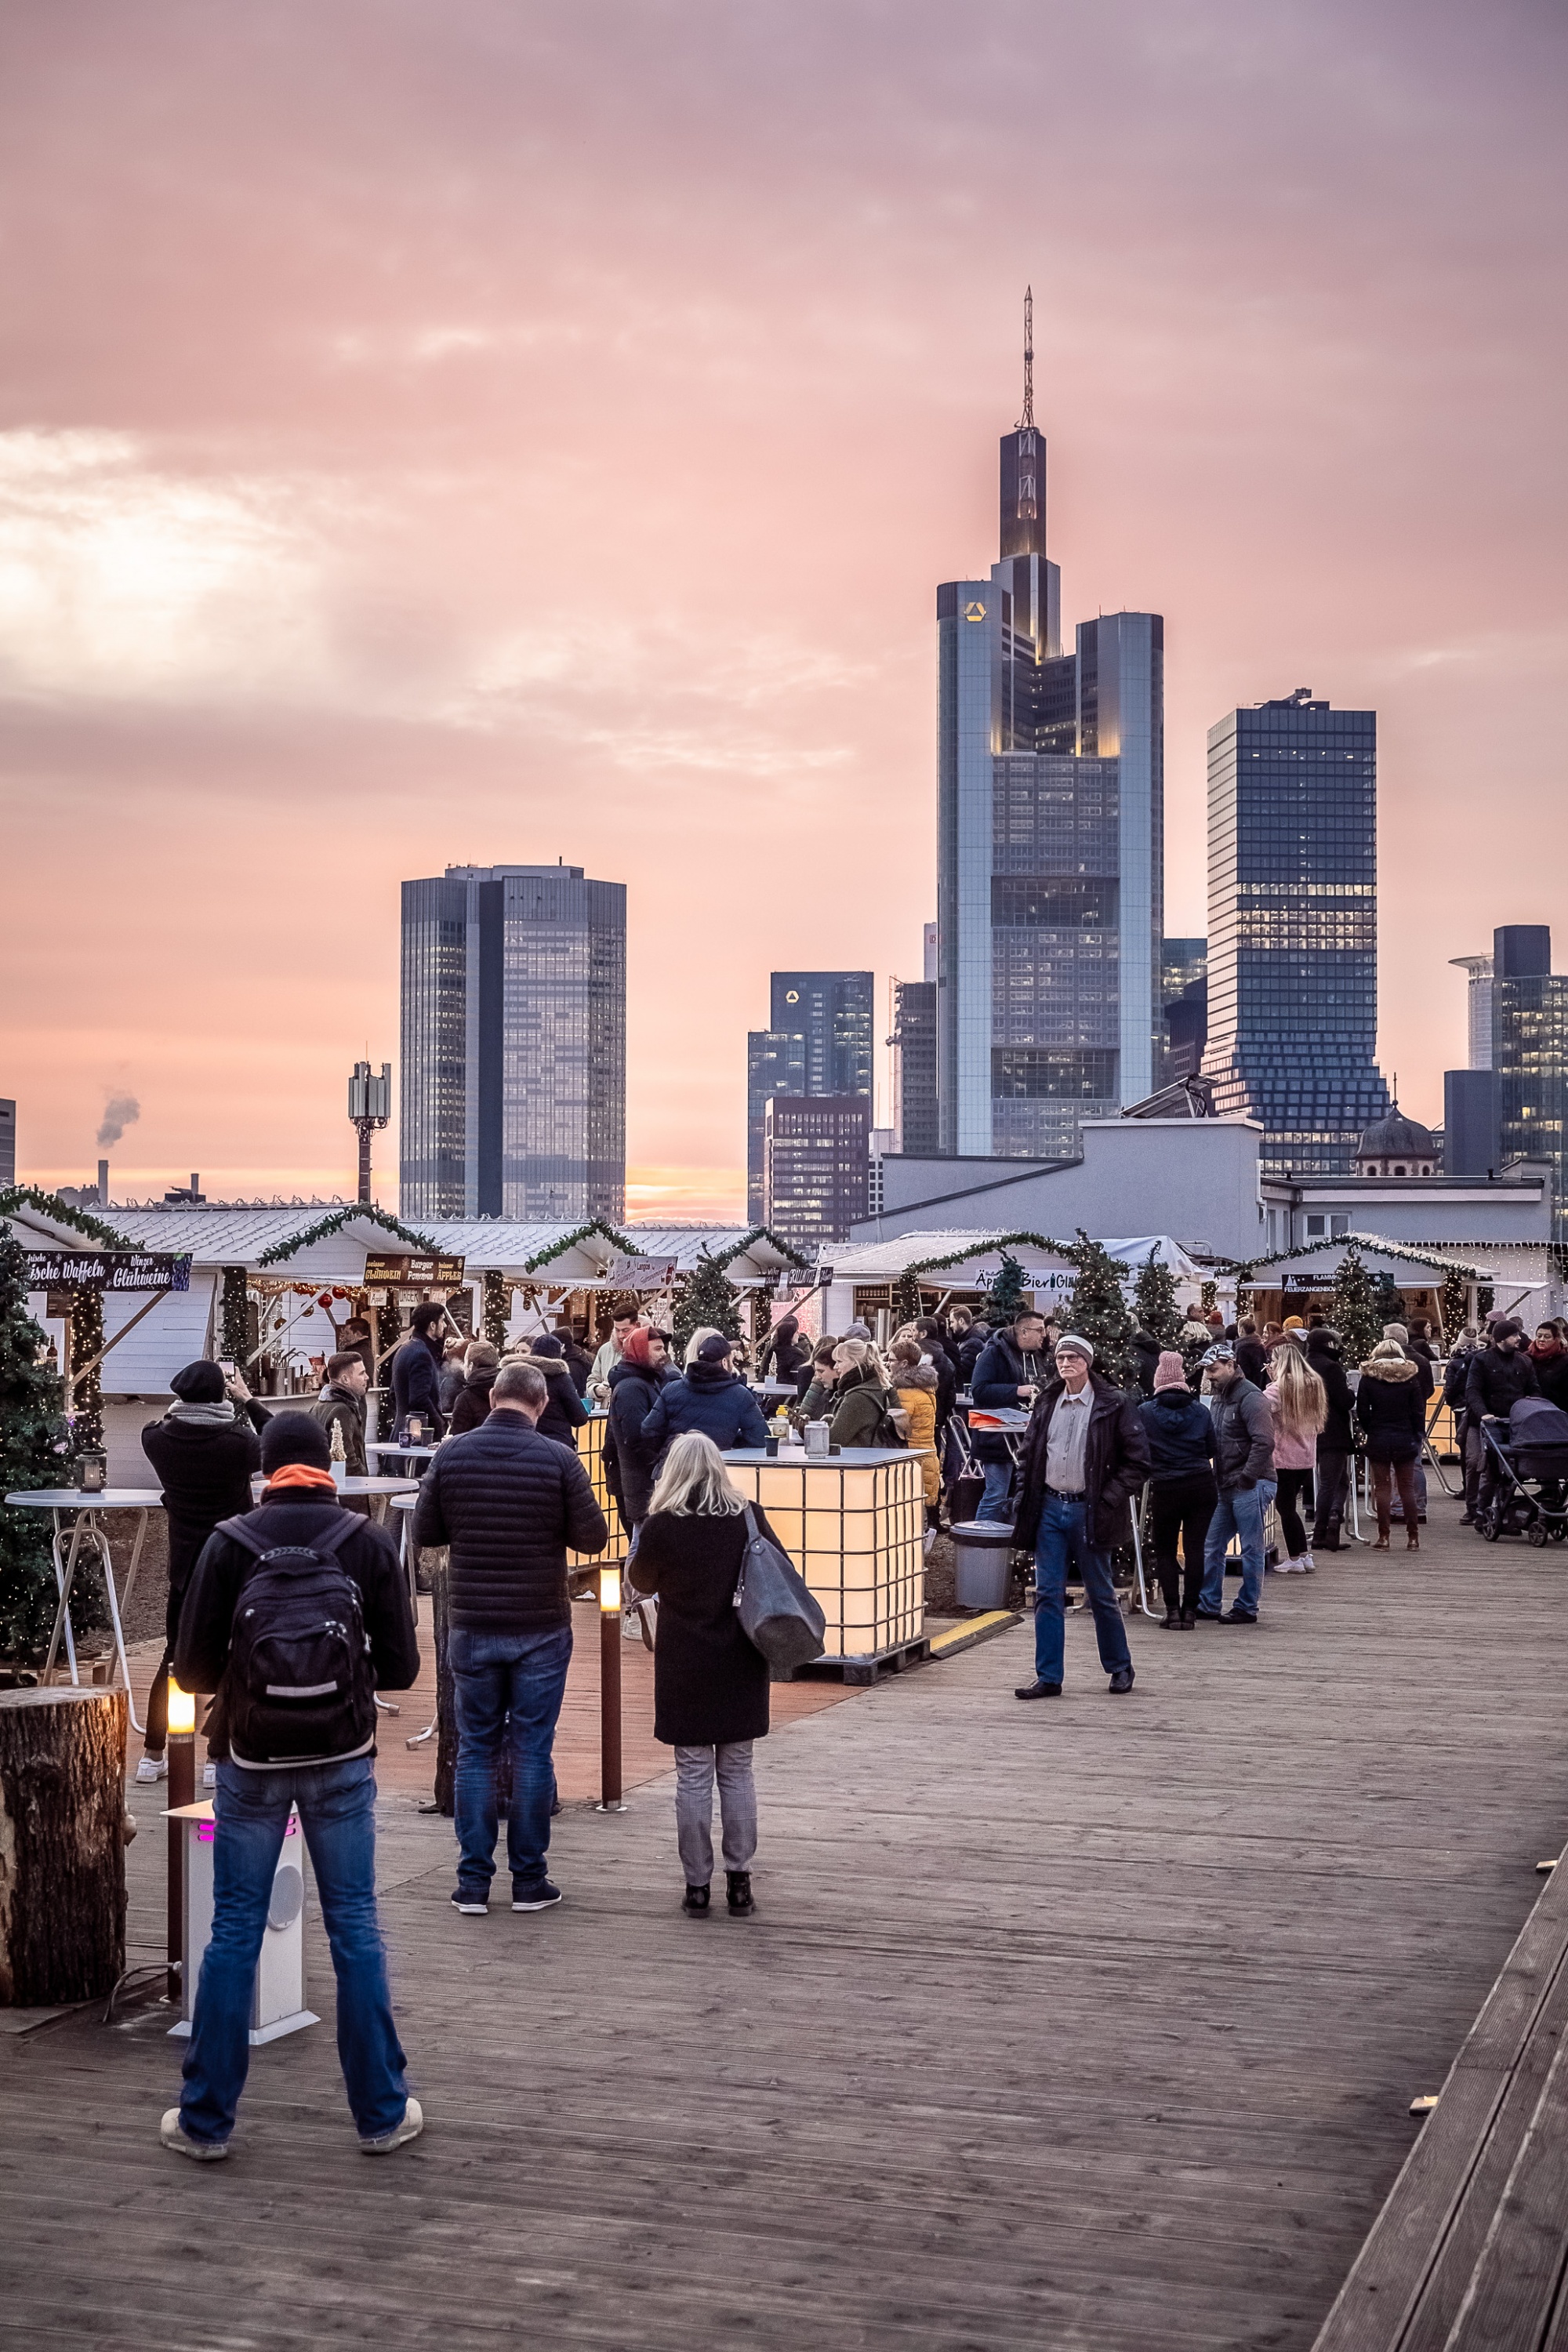 You can enjoy the City Beach Rooftop Frankfurt also in winter when they host a Christmas Market // Photo Credit City Beach Frankfurt